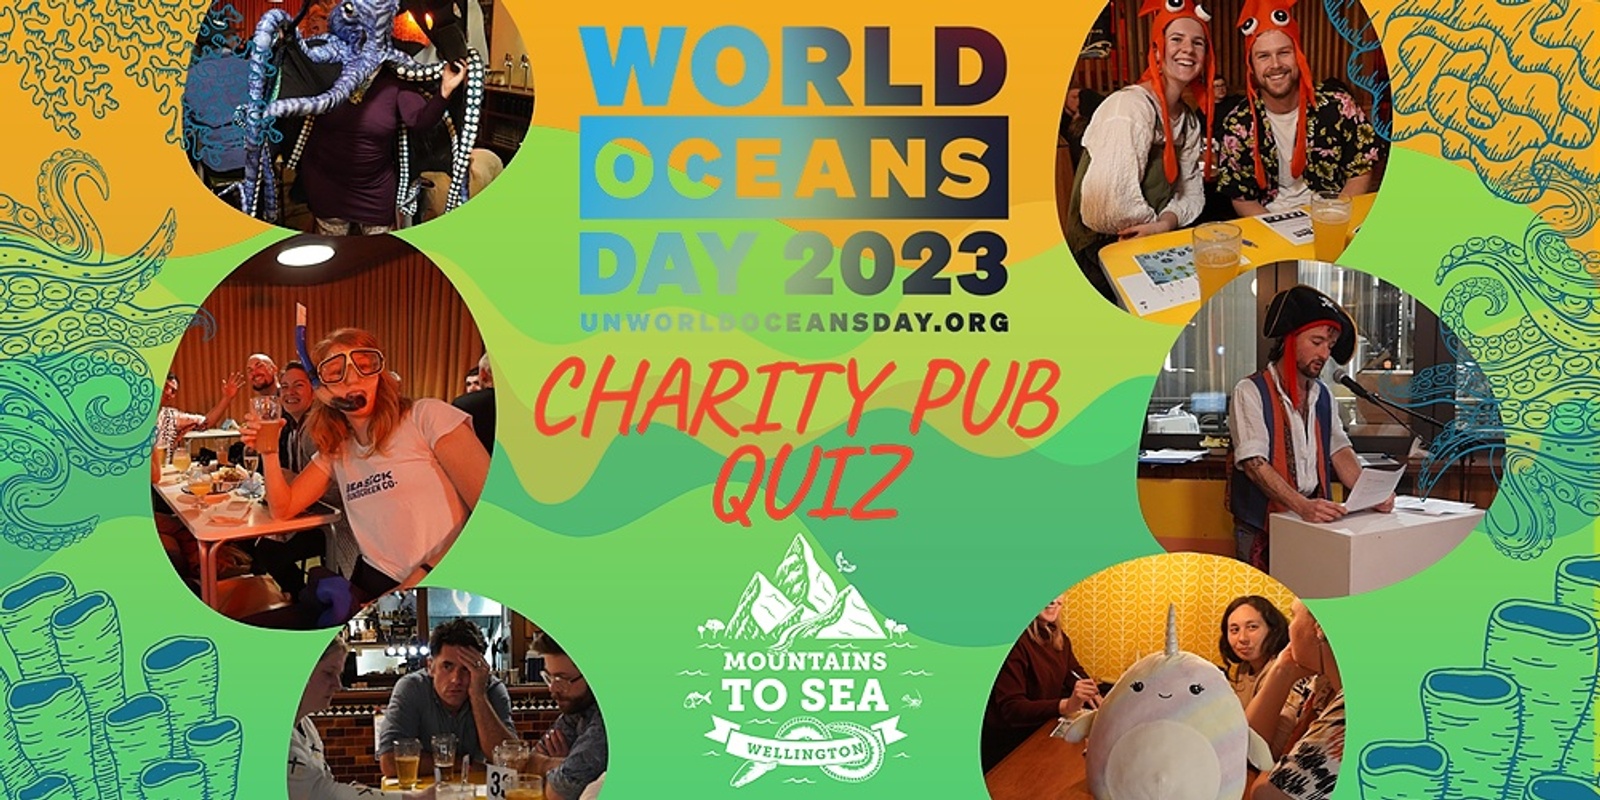 Banner image for Mountains to Sea Wellington World Oceans Day Charity Pub Quiz 